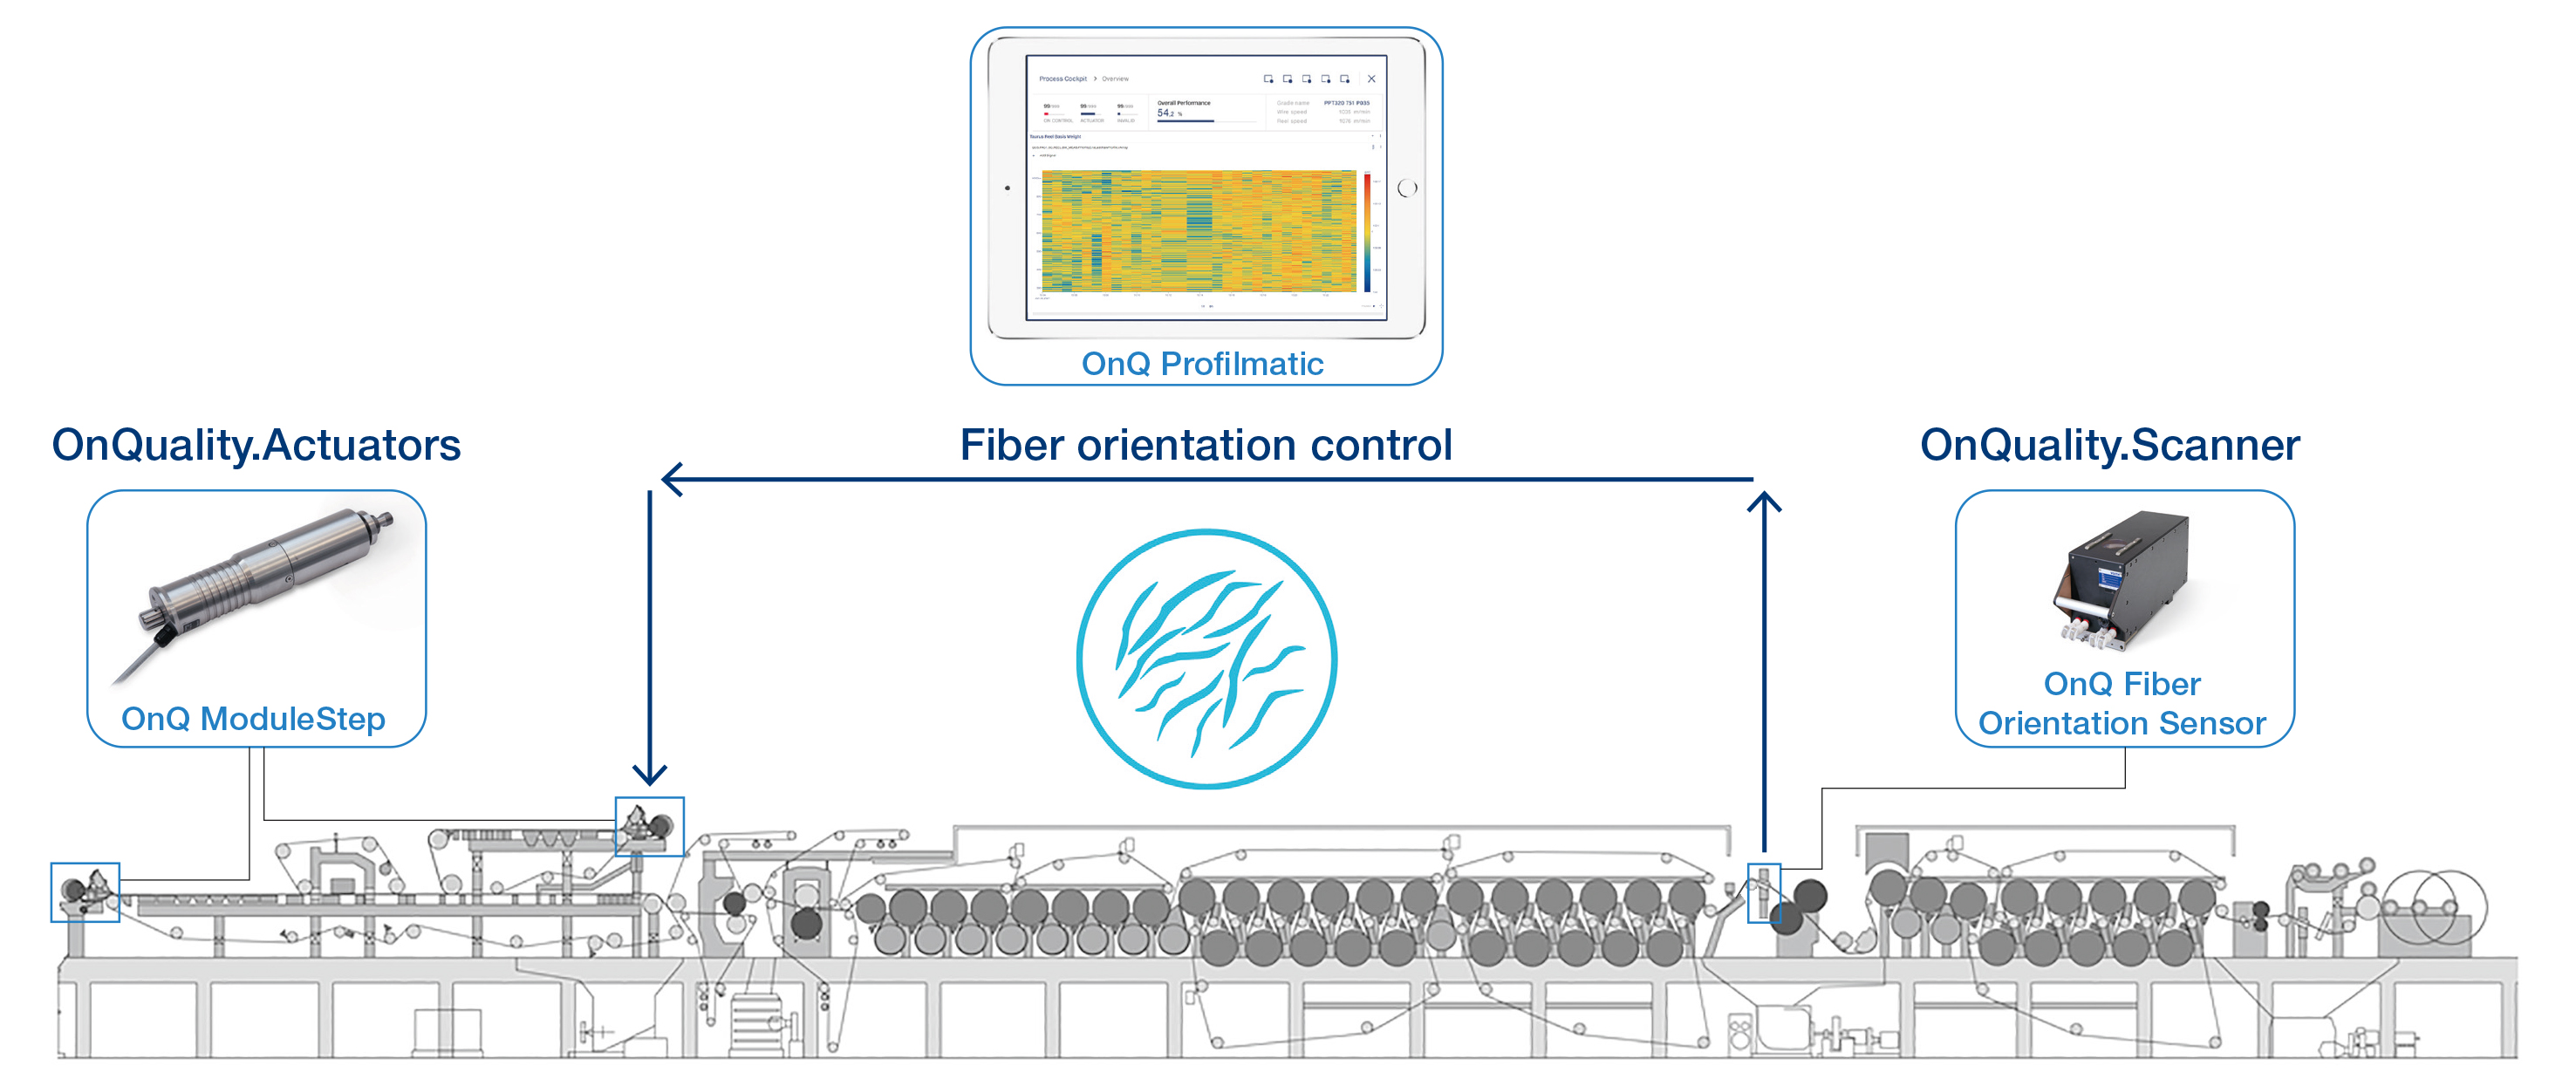 With the newly launched fiber orientation measurement and control of Voith's OnQuality product family, paper manufacturers can reliably control the fiber orientation angle.